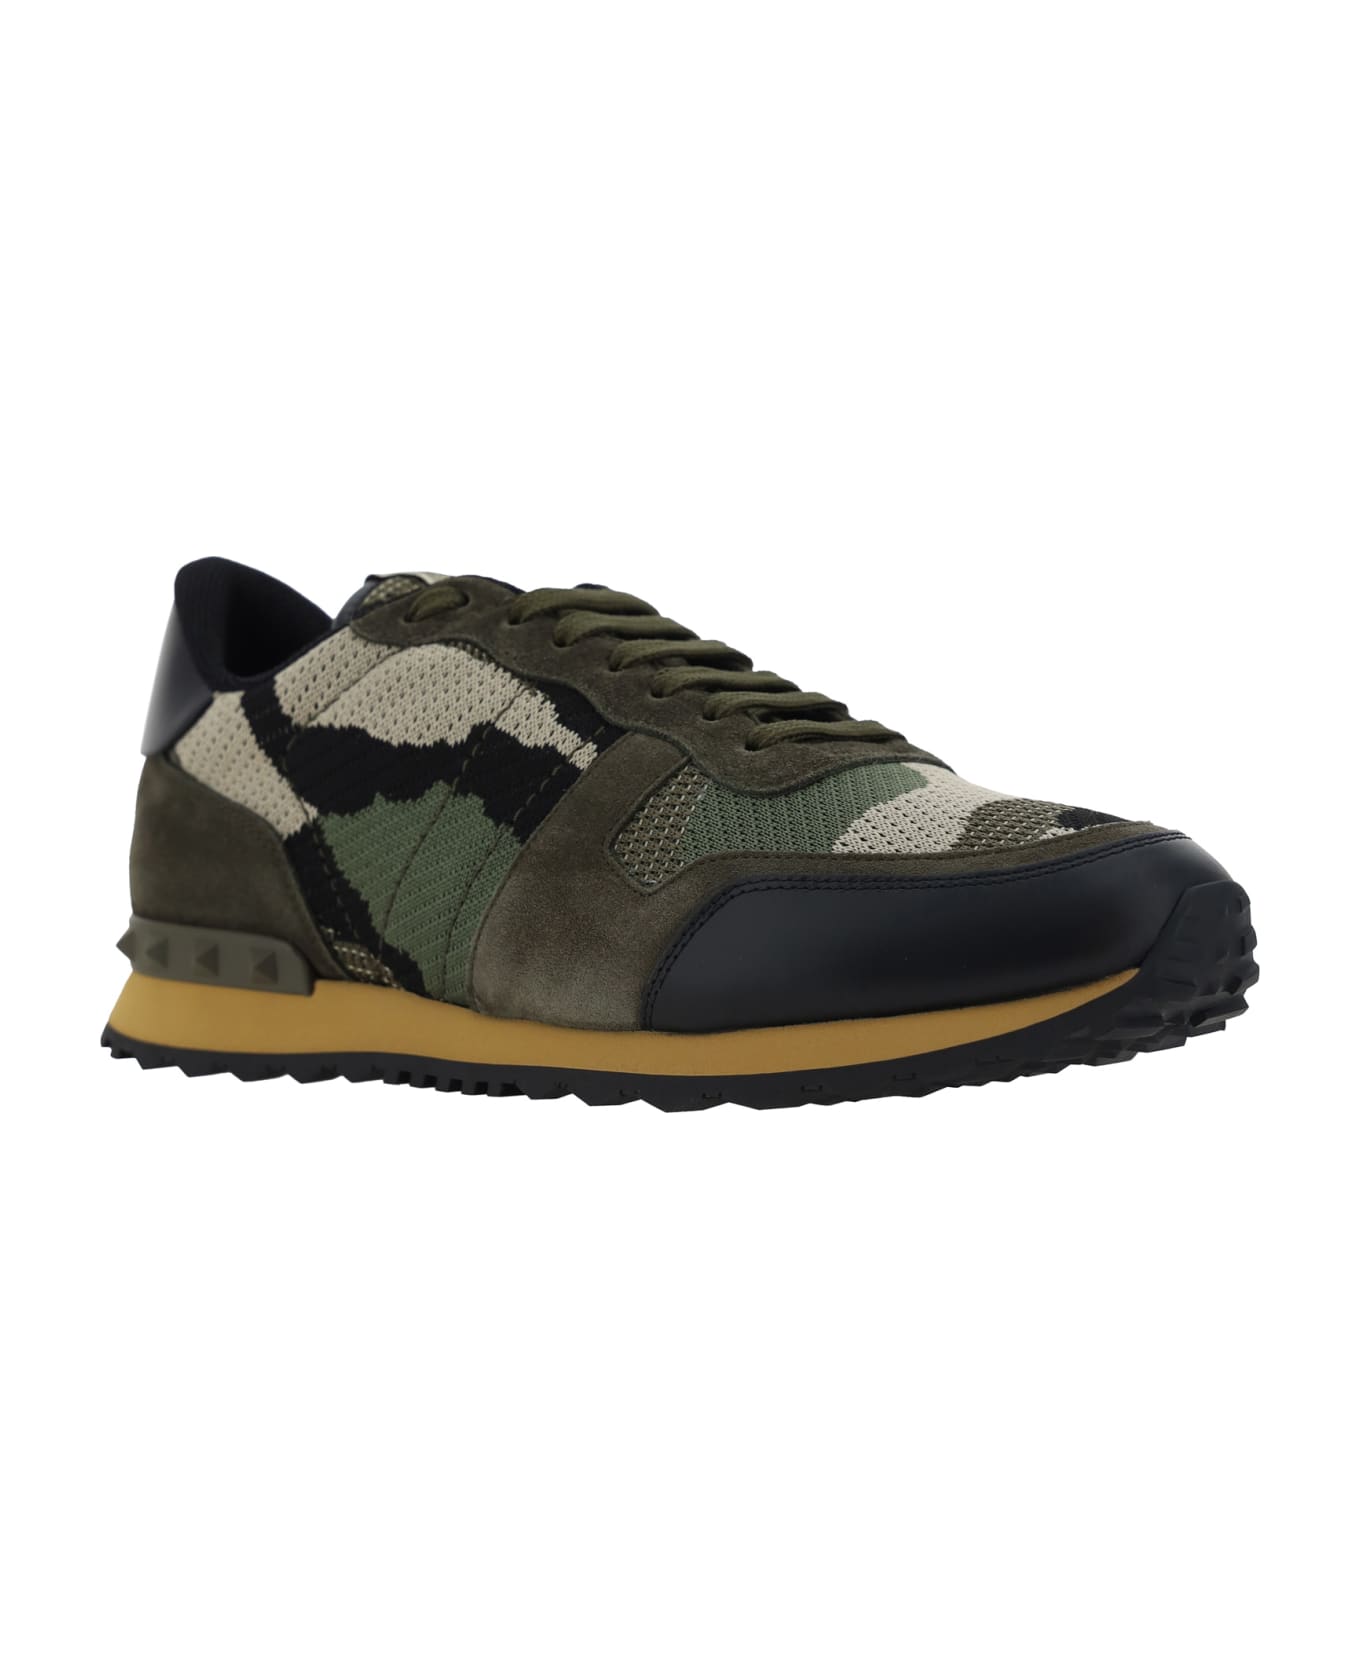 Valentino features Rockrunner Pain - Brown